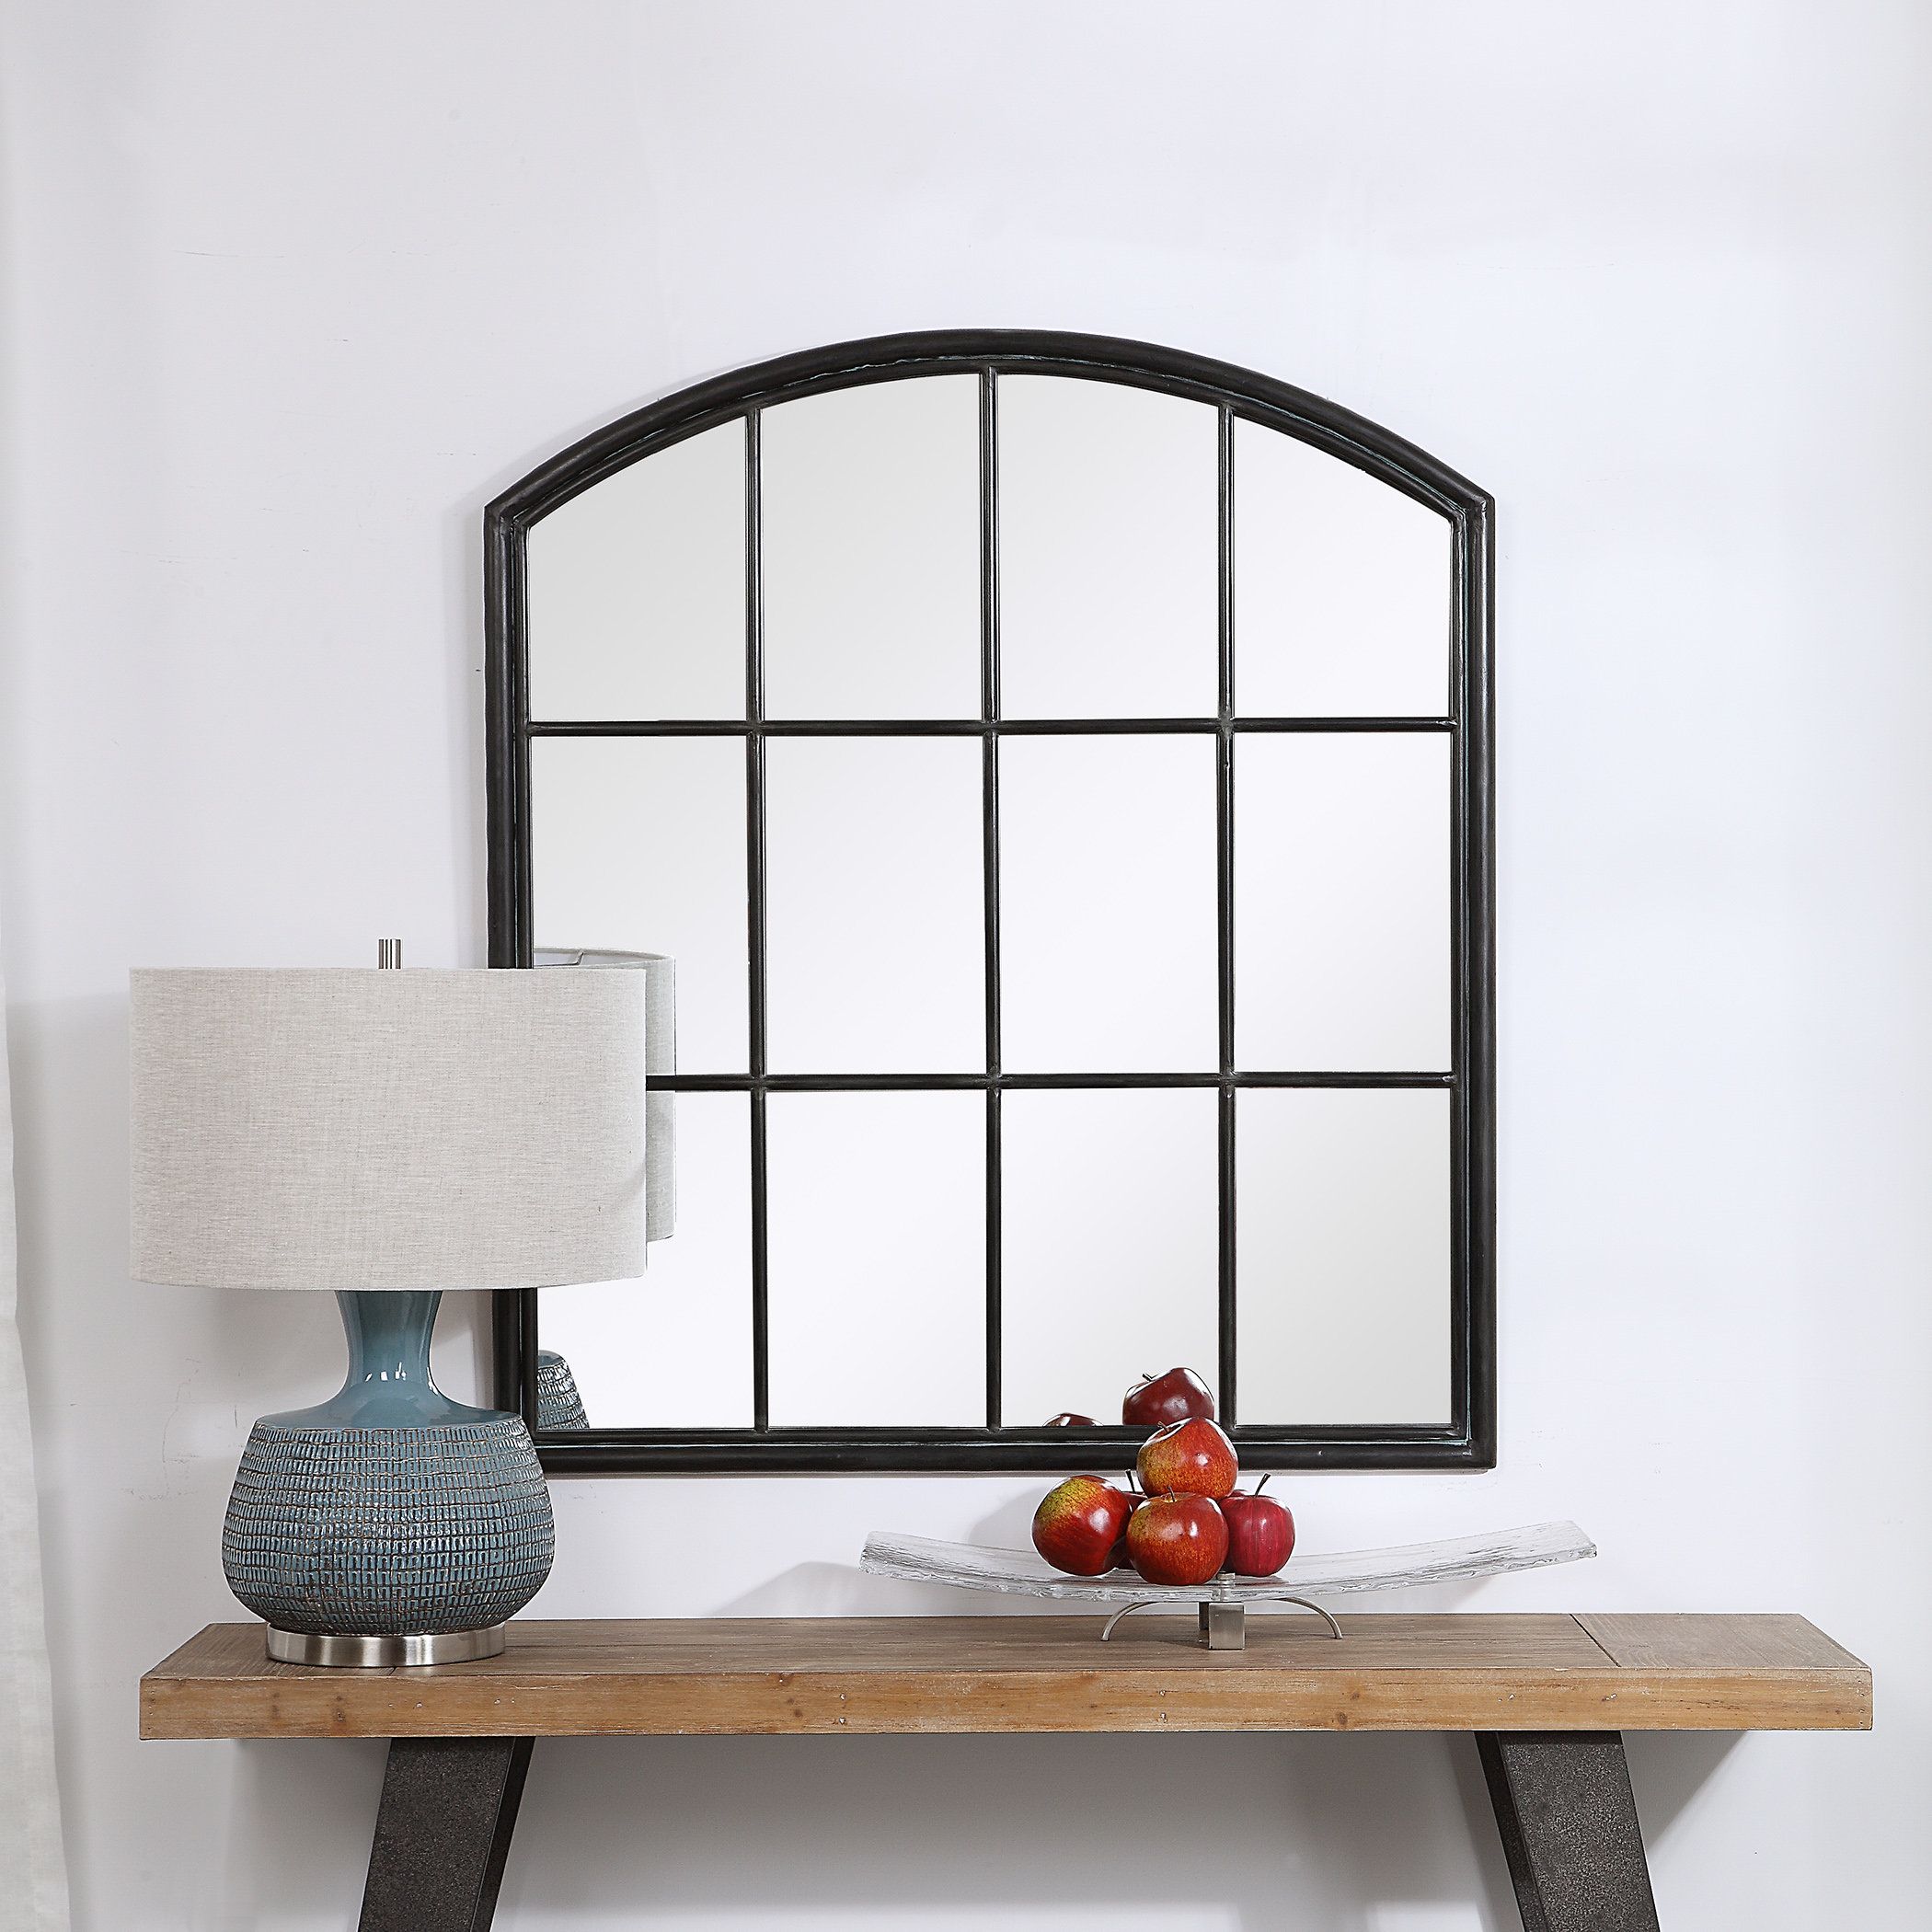 Tindell Arch Accent Mirror | Birch Lane Intended For Austin Industrial Accent Mirrors (View 9 of 20)